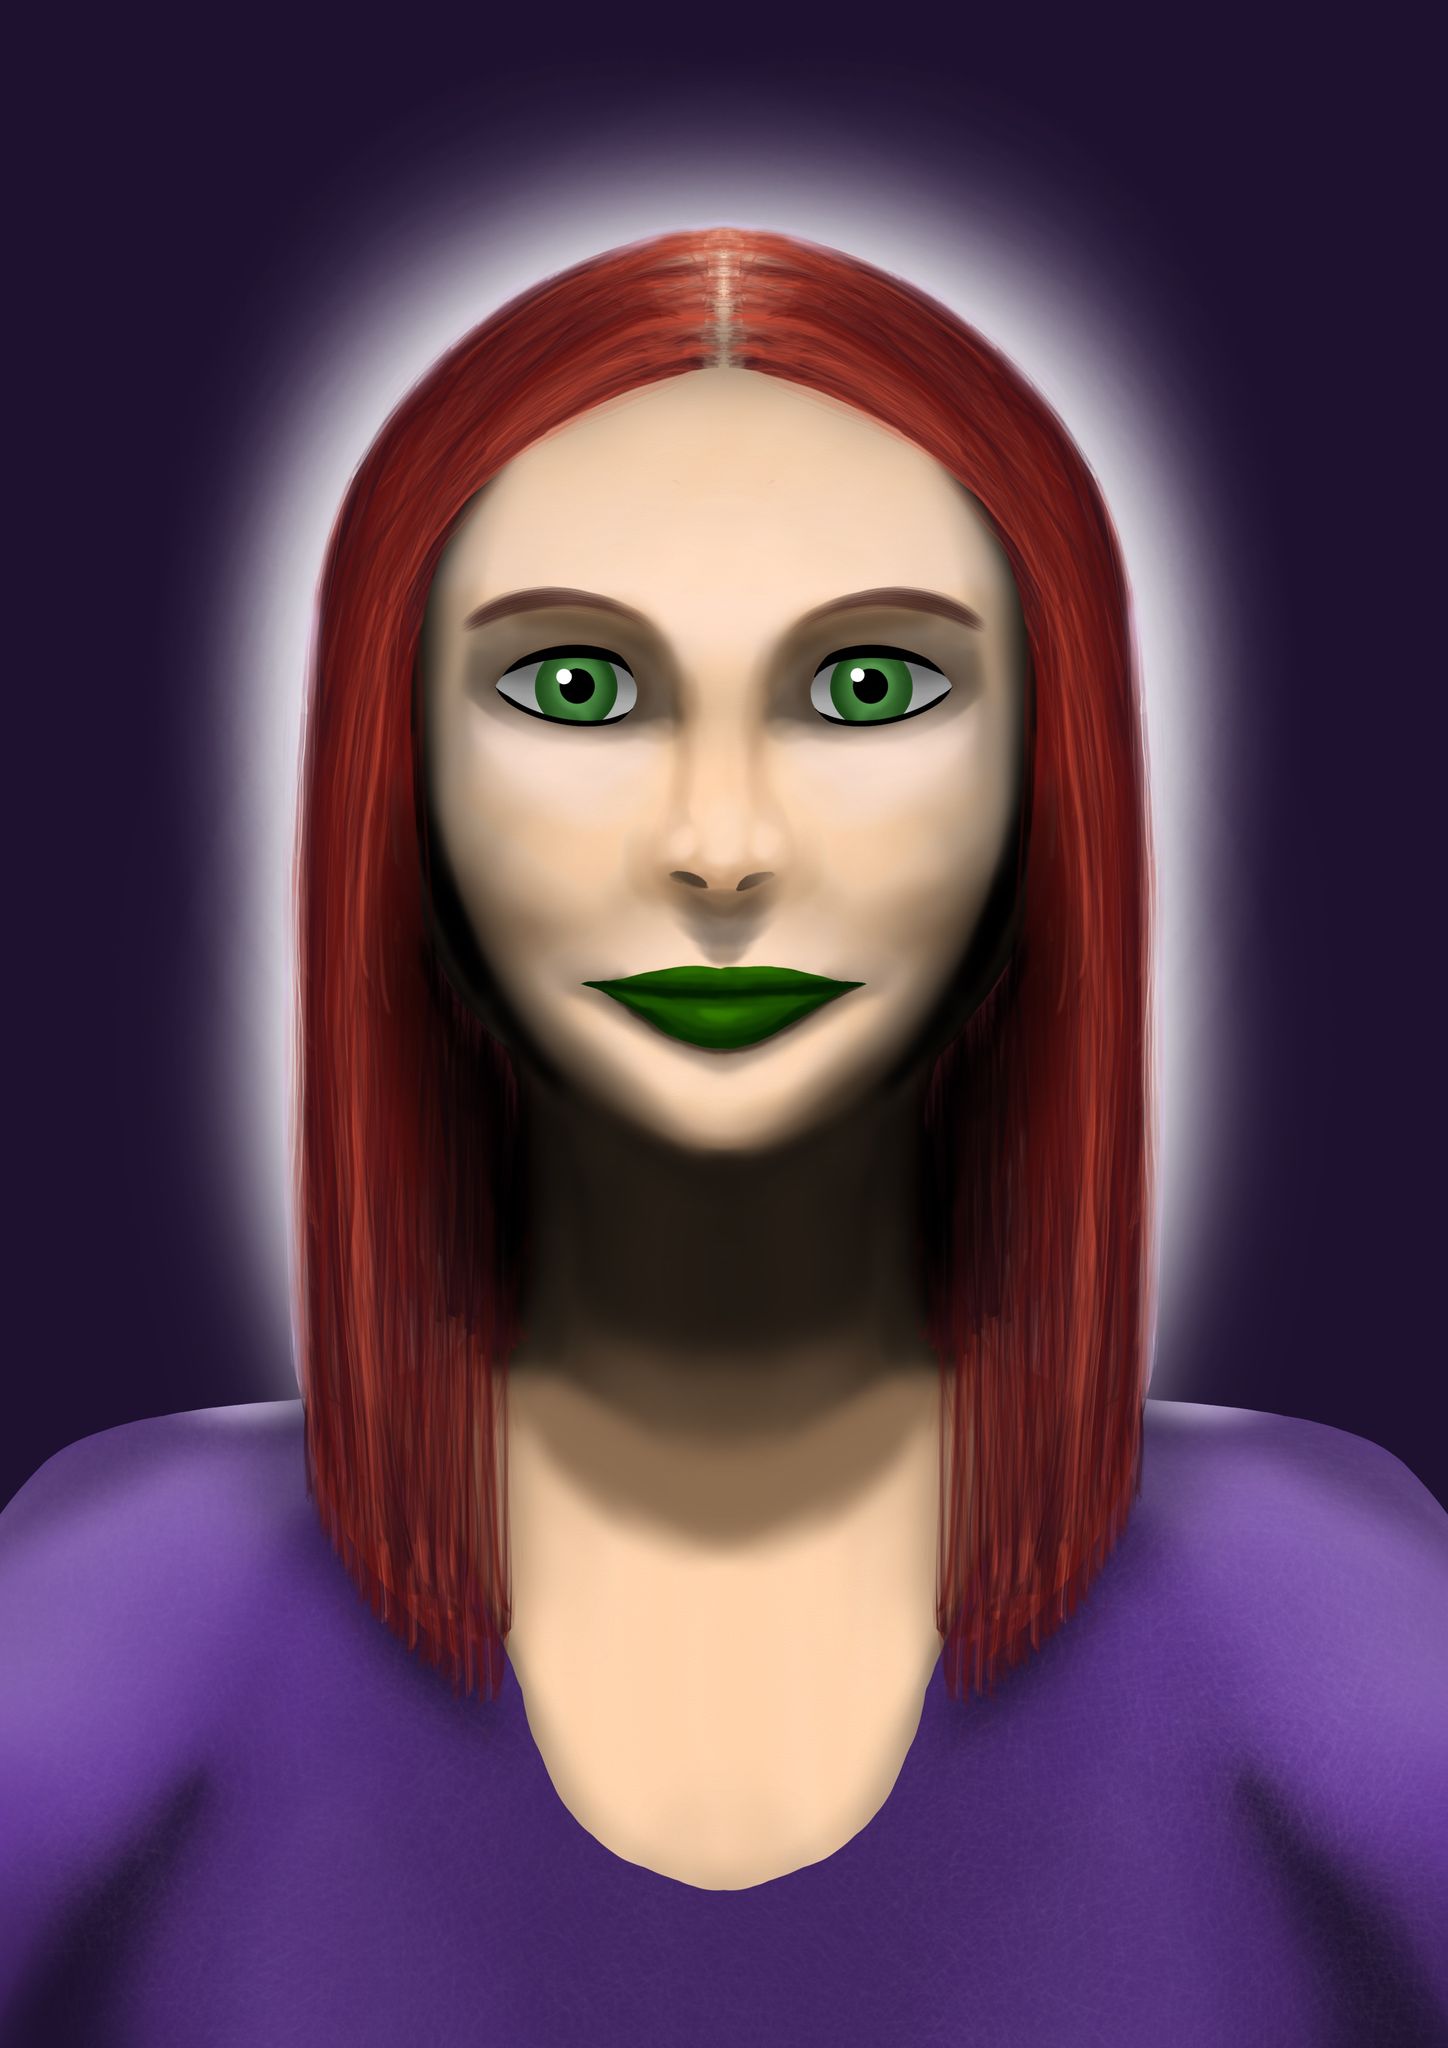 A head and shoulders portrait painting of a white woman with piercing green eyes, long red hair, and dark green lipstick. She’s wearing a dark purple top, and there’s a bright light shining behind her that’s lighting up her shoulders and the very edges of her hair.